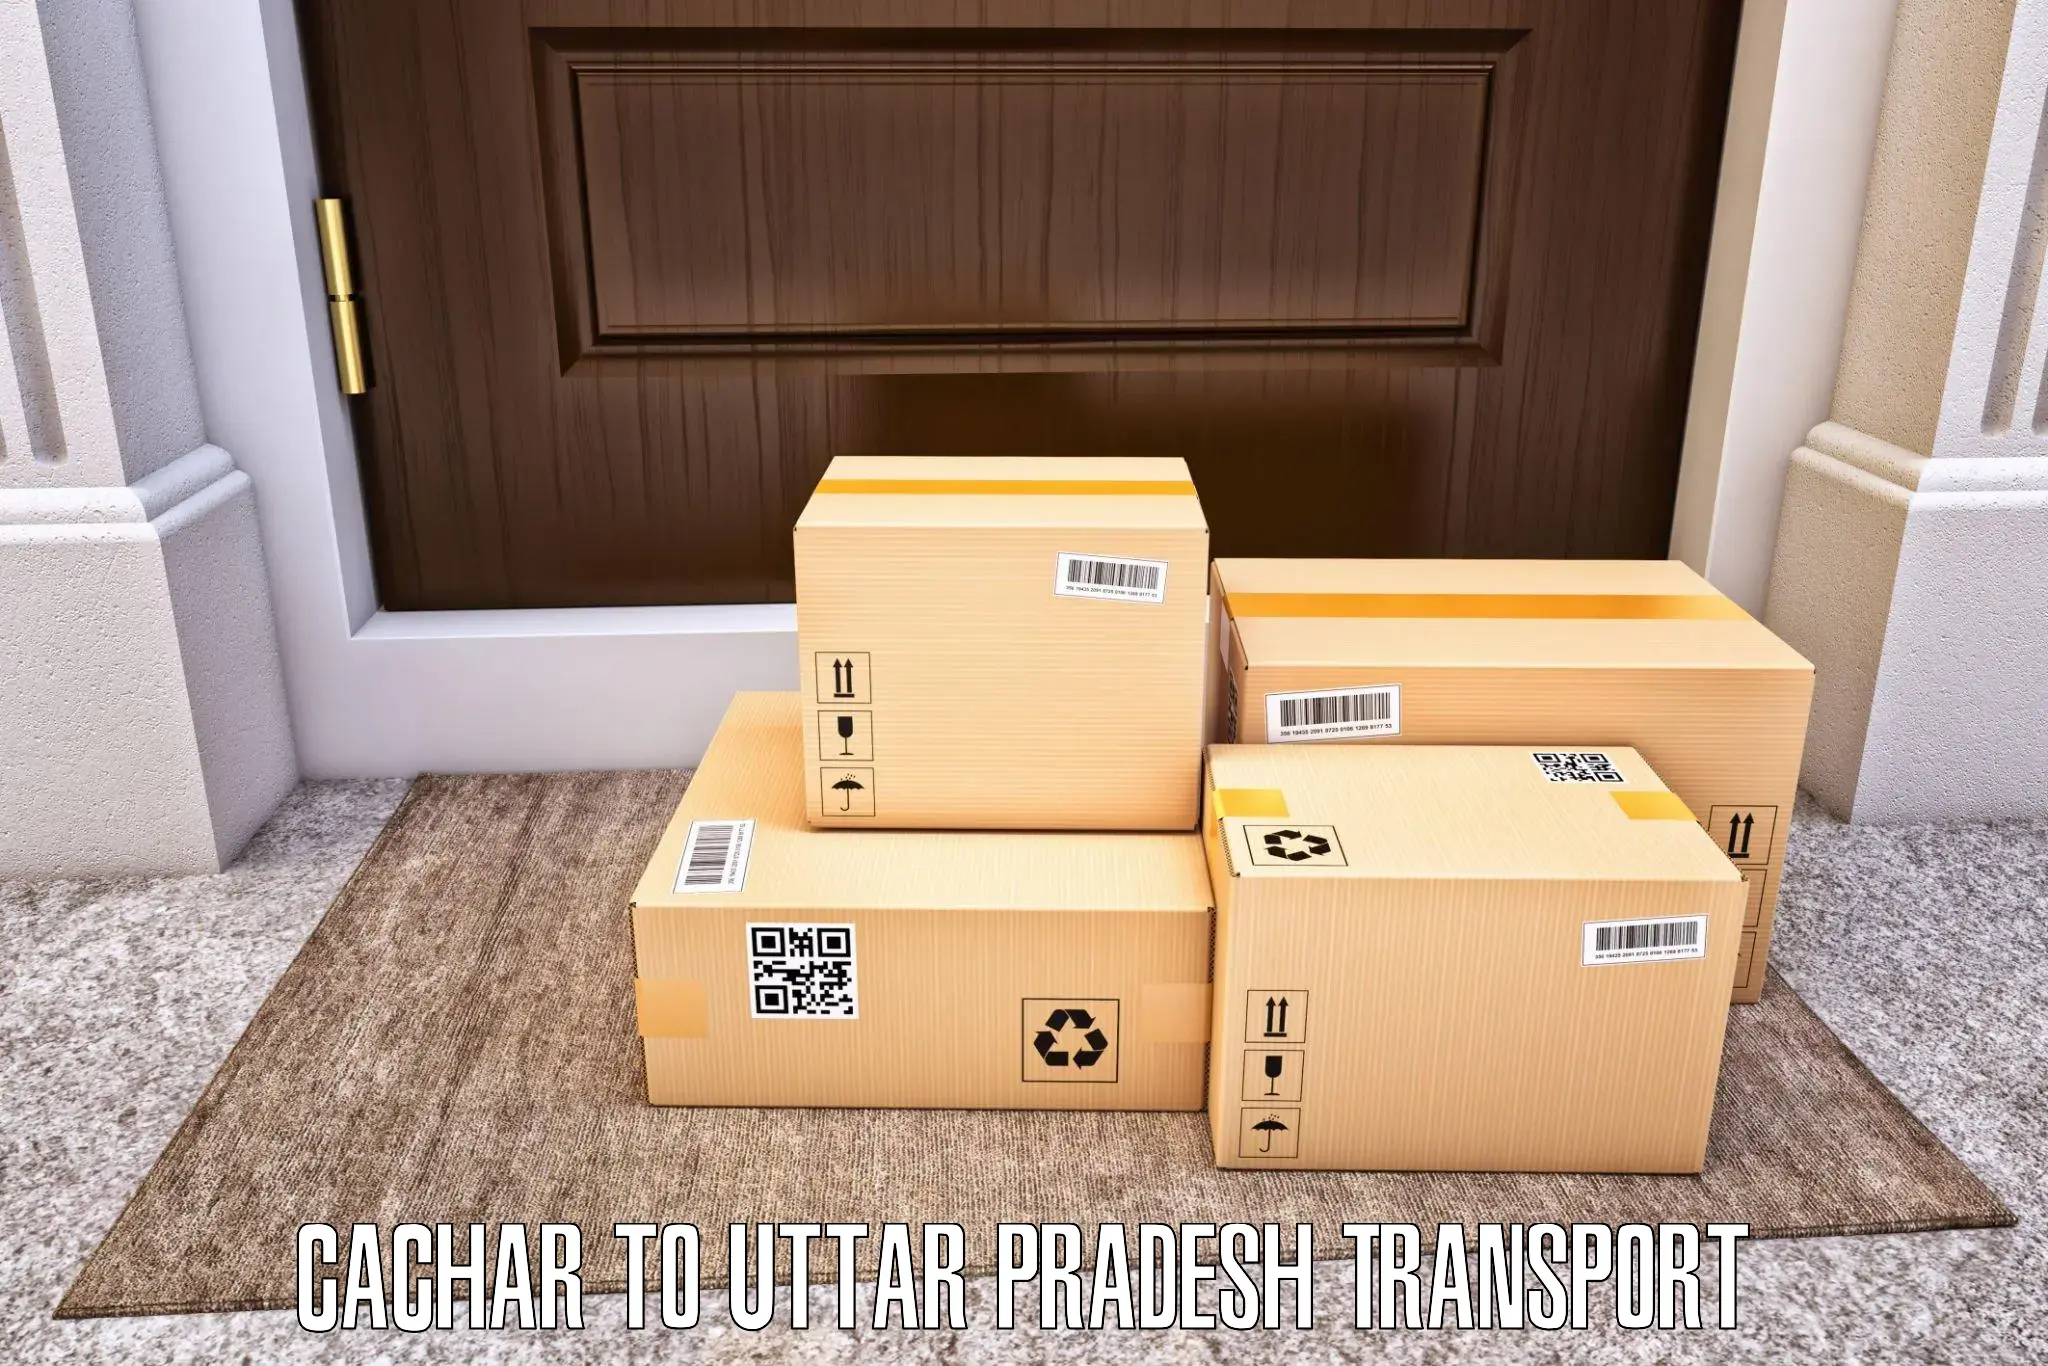 Air freight transport services Cachar to Gonda